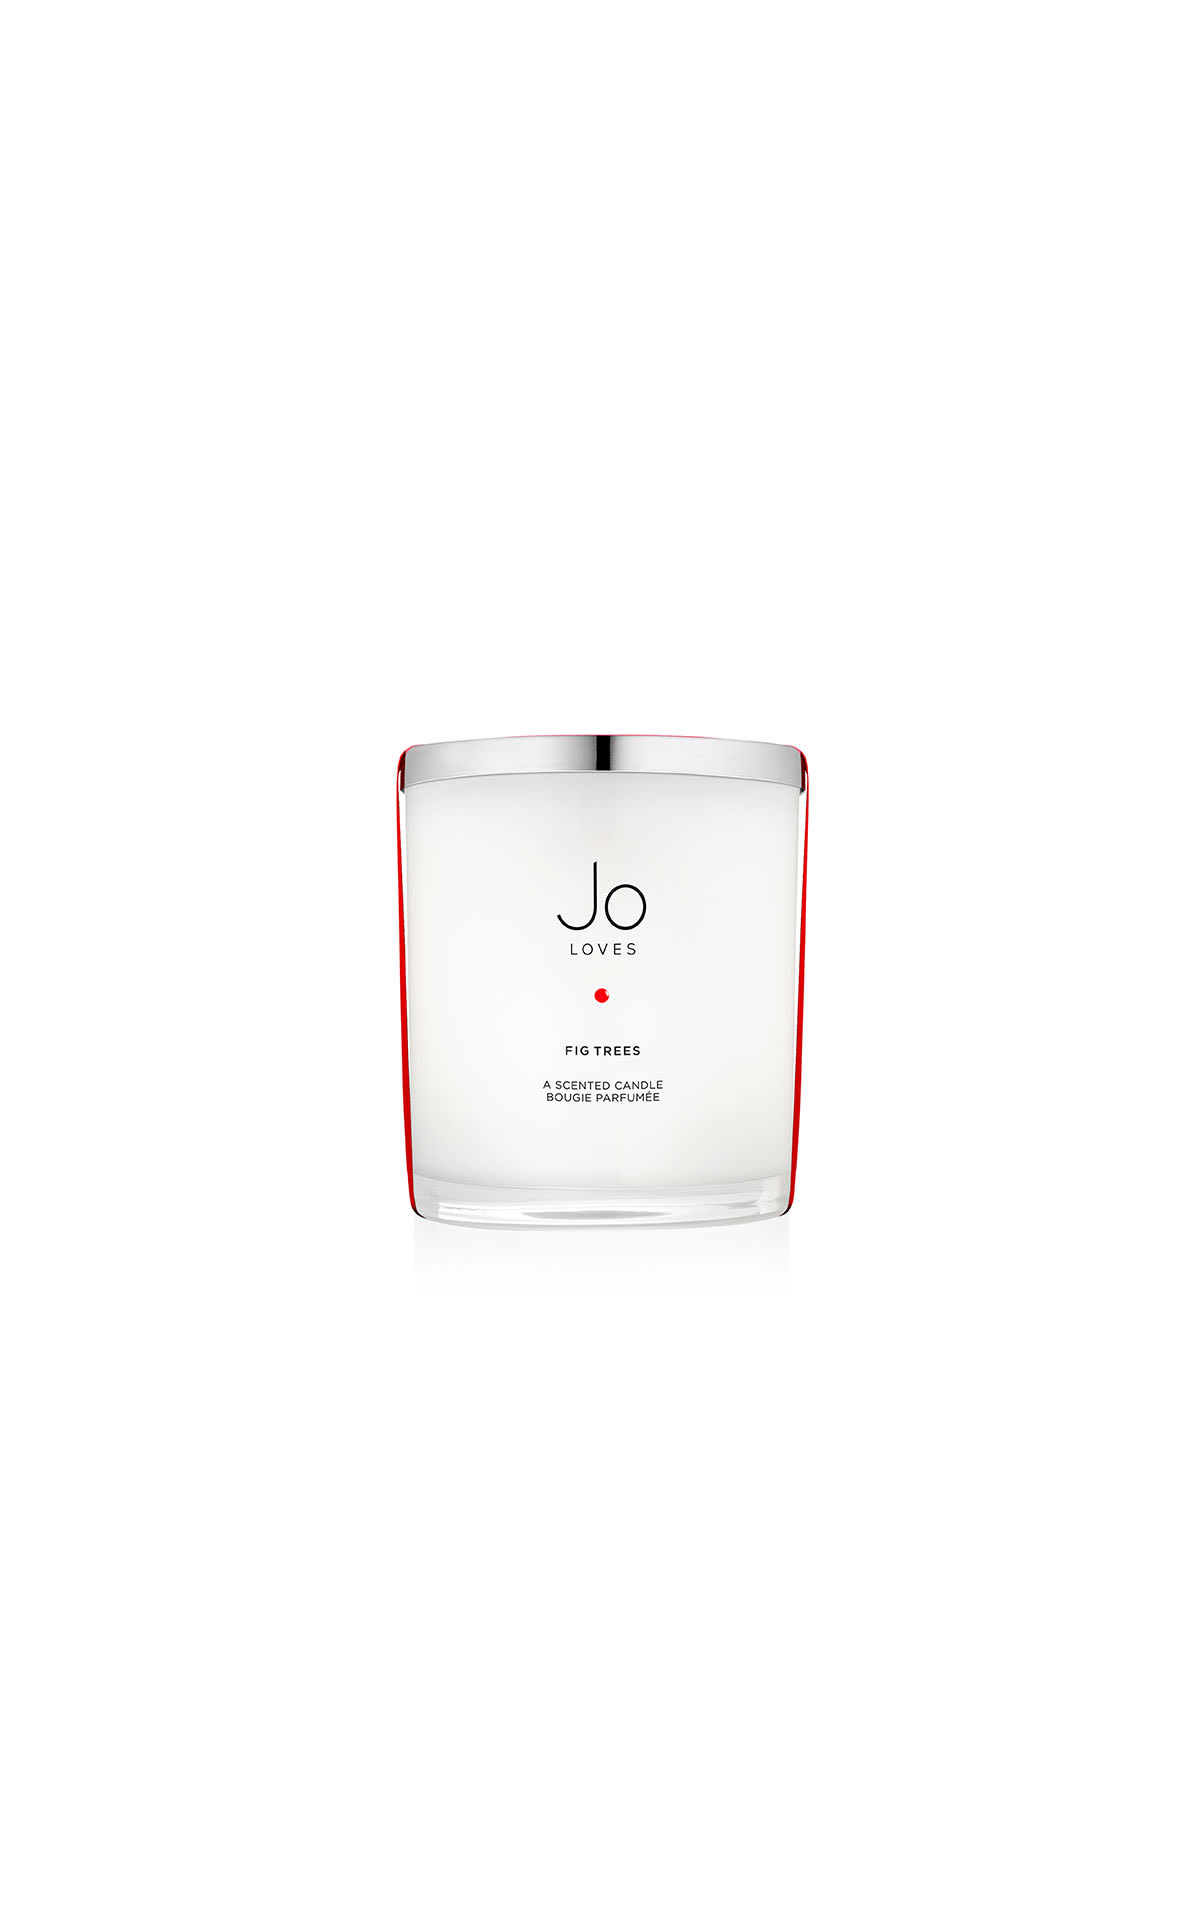 Jo Loves A luxury candle in fig trees from Bicester Village